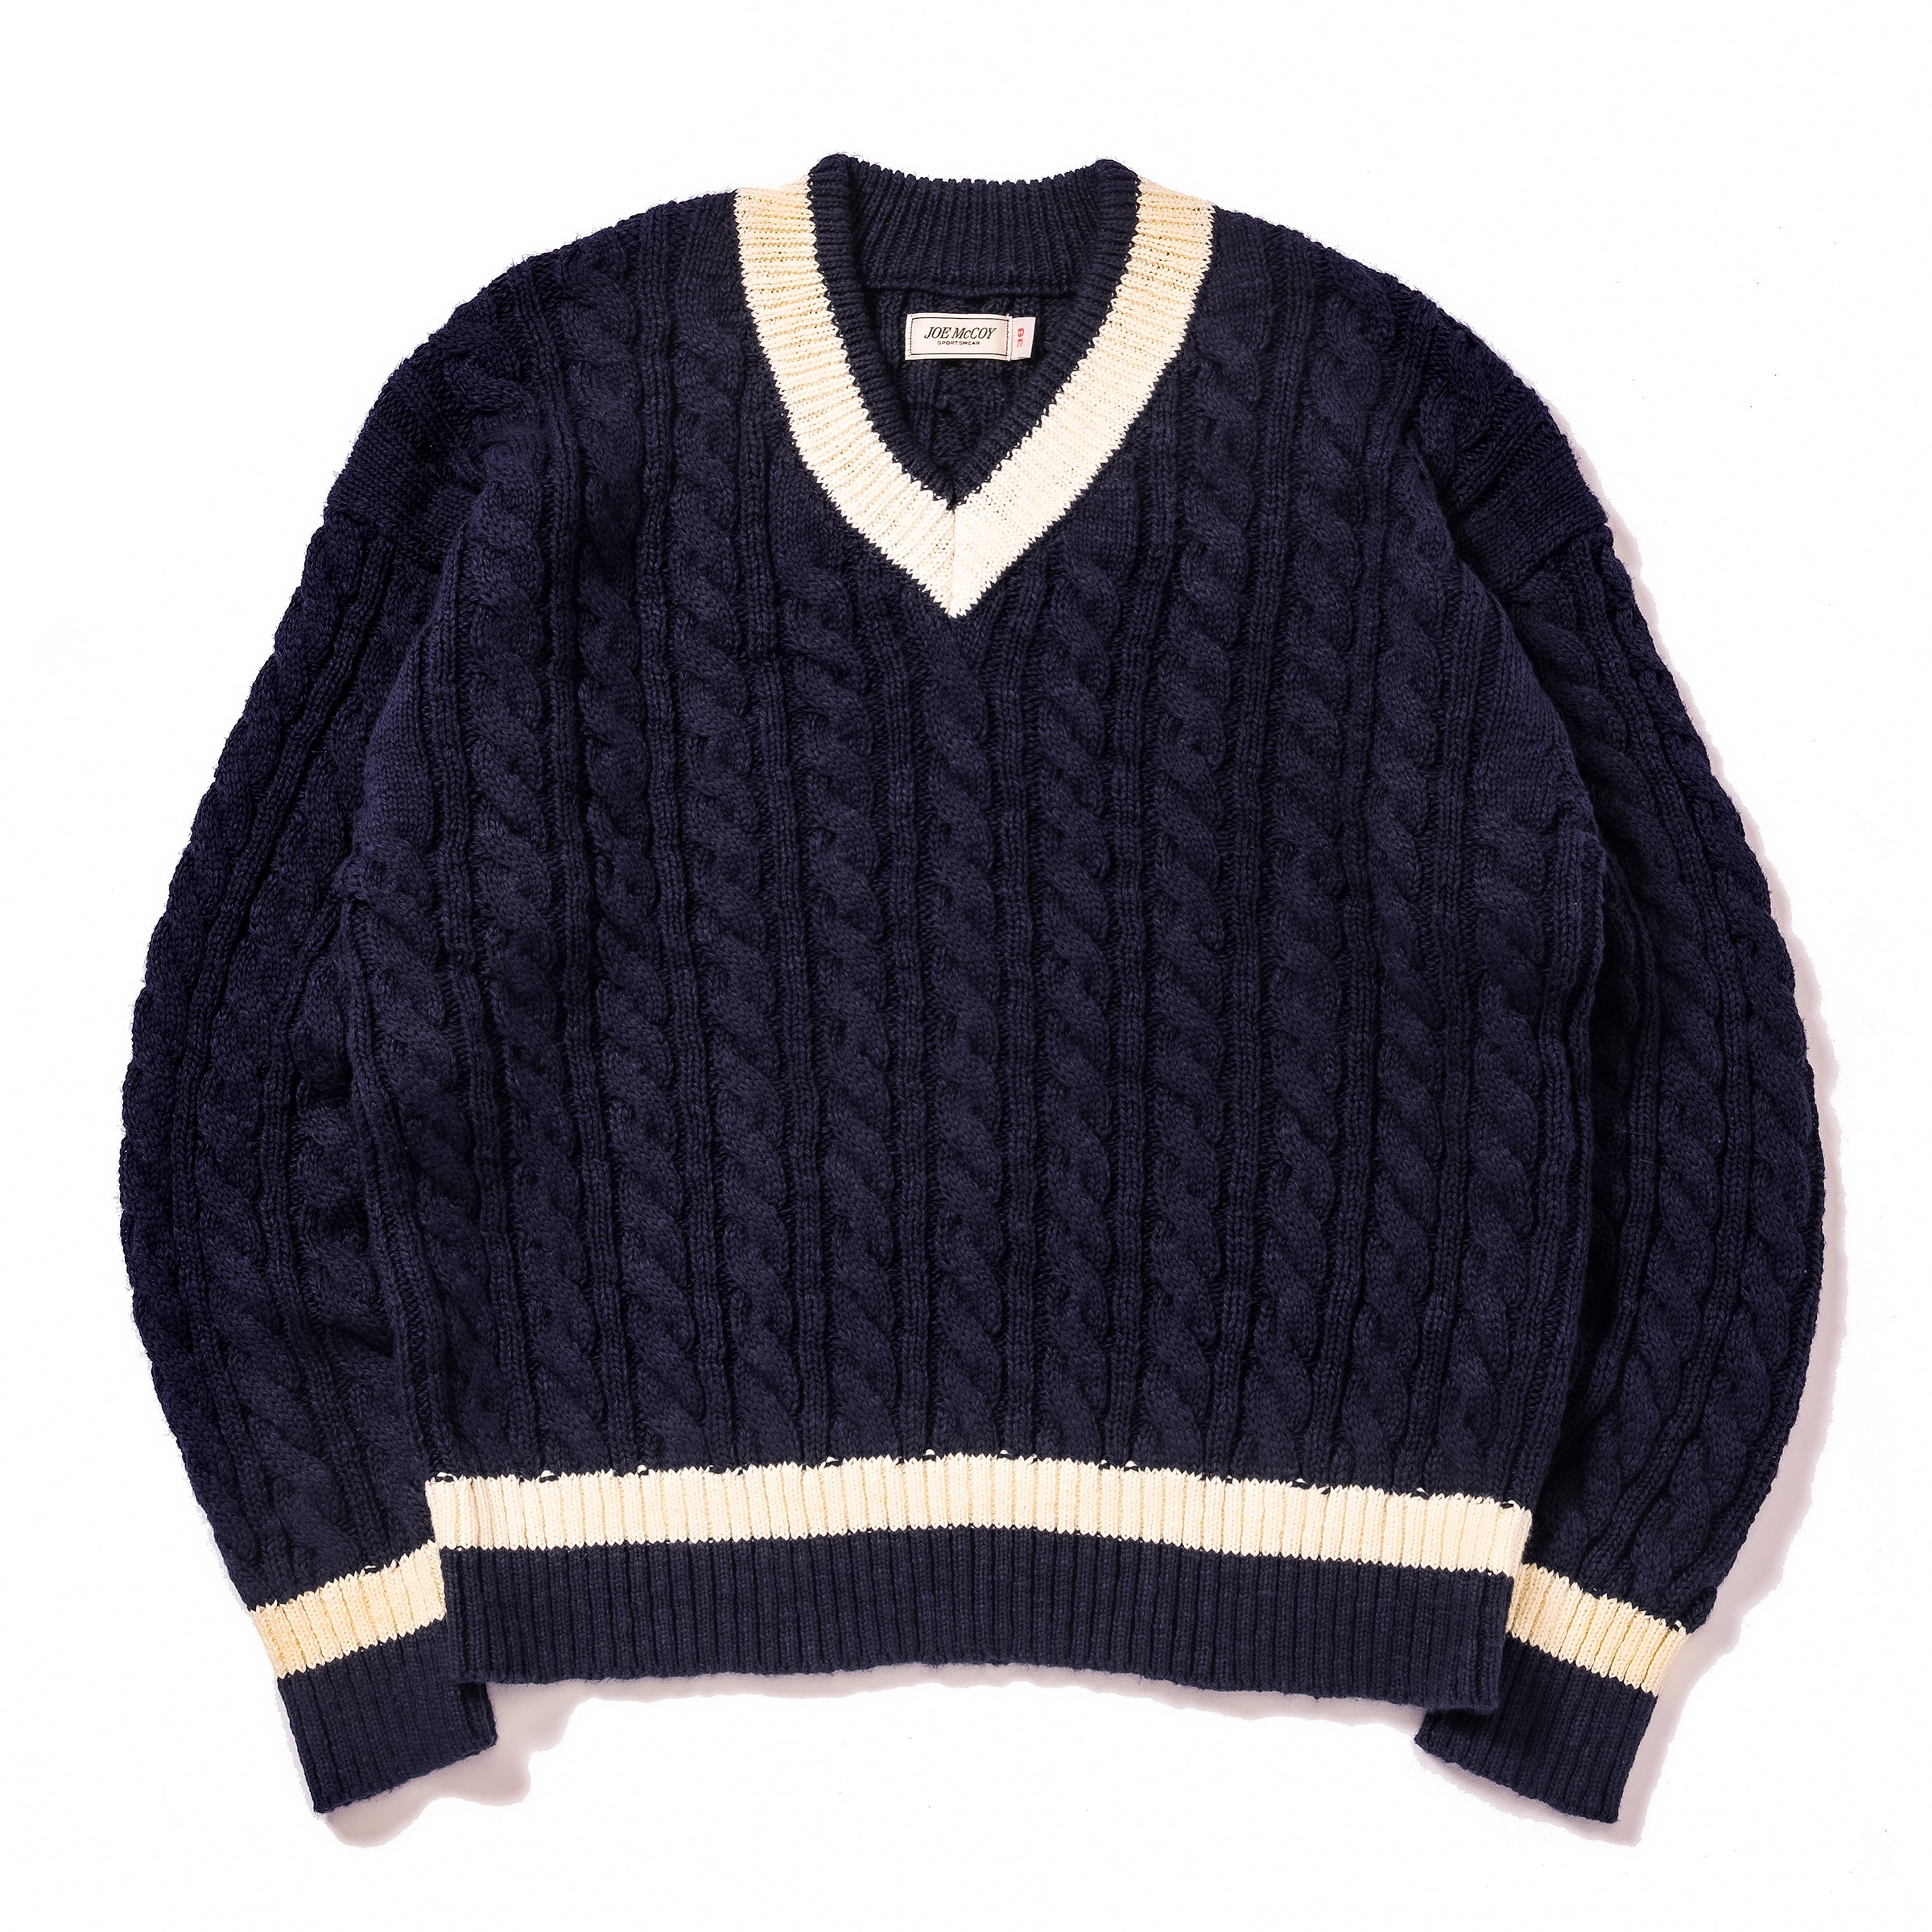 TILDEN KNIT SWEATER – The Real McCoy's